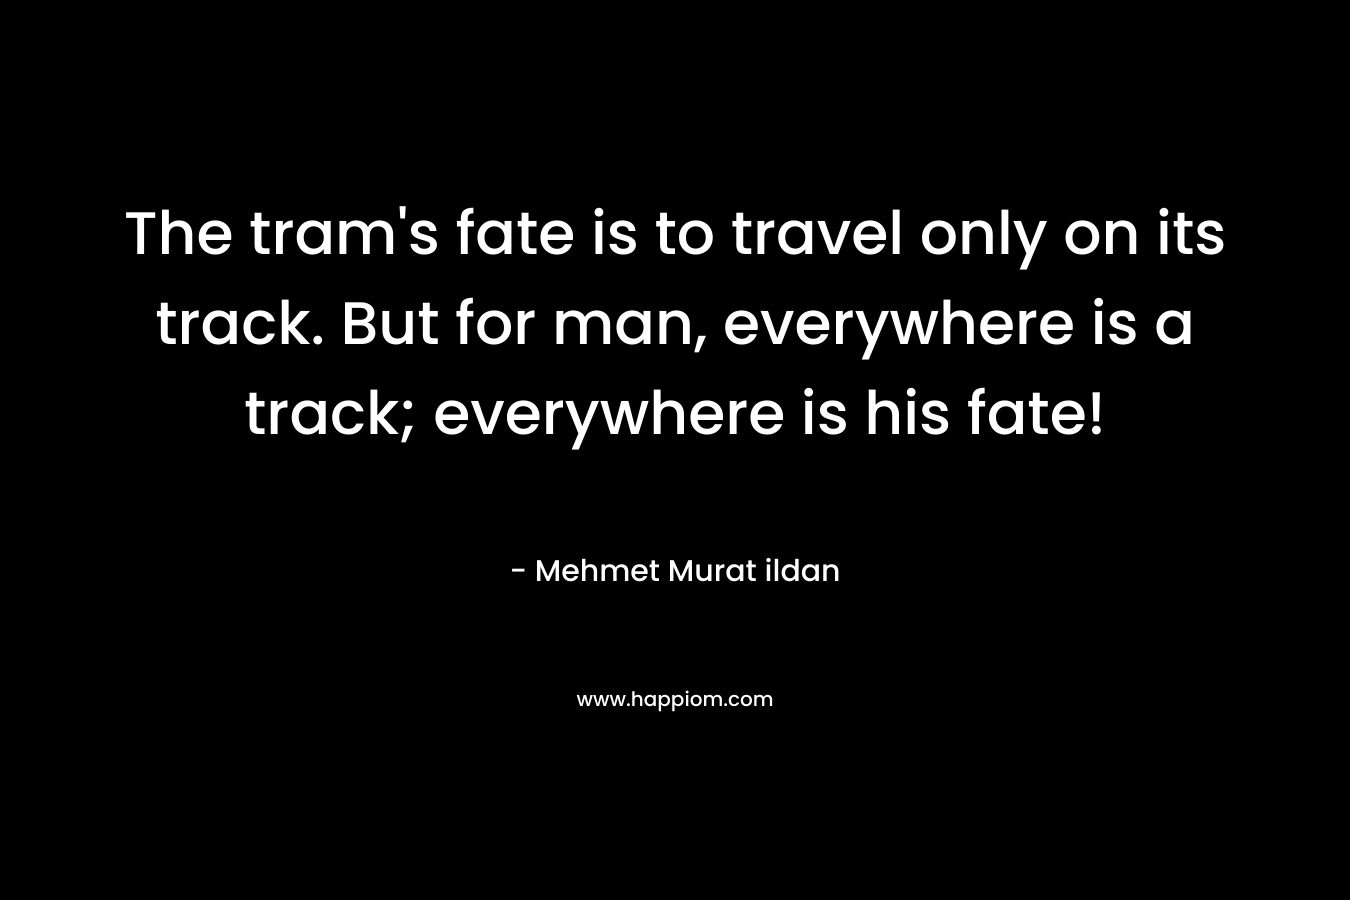 The tram's fate is to travel only on its track. But for man, everywhere is a track; everywhere is his fate!